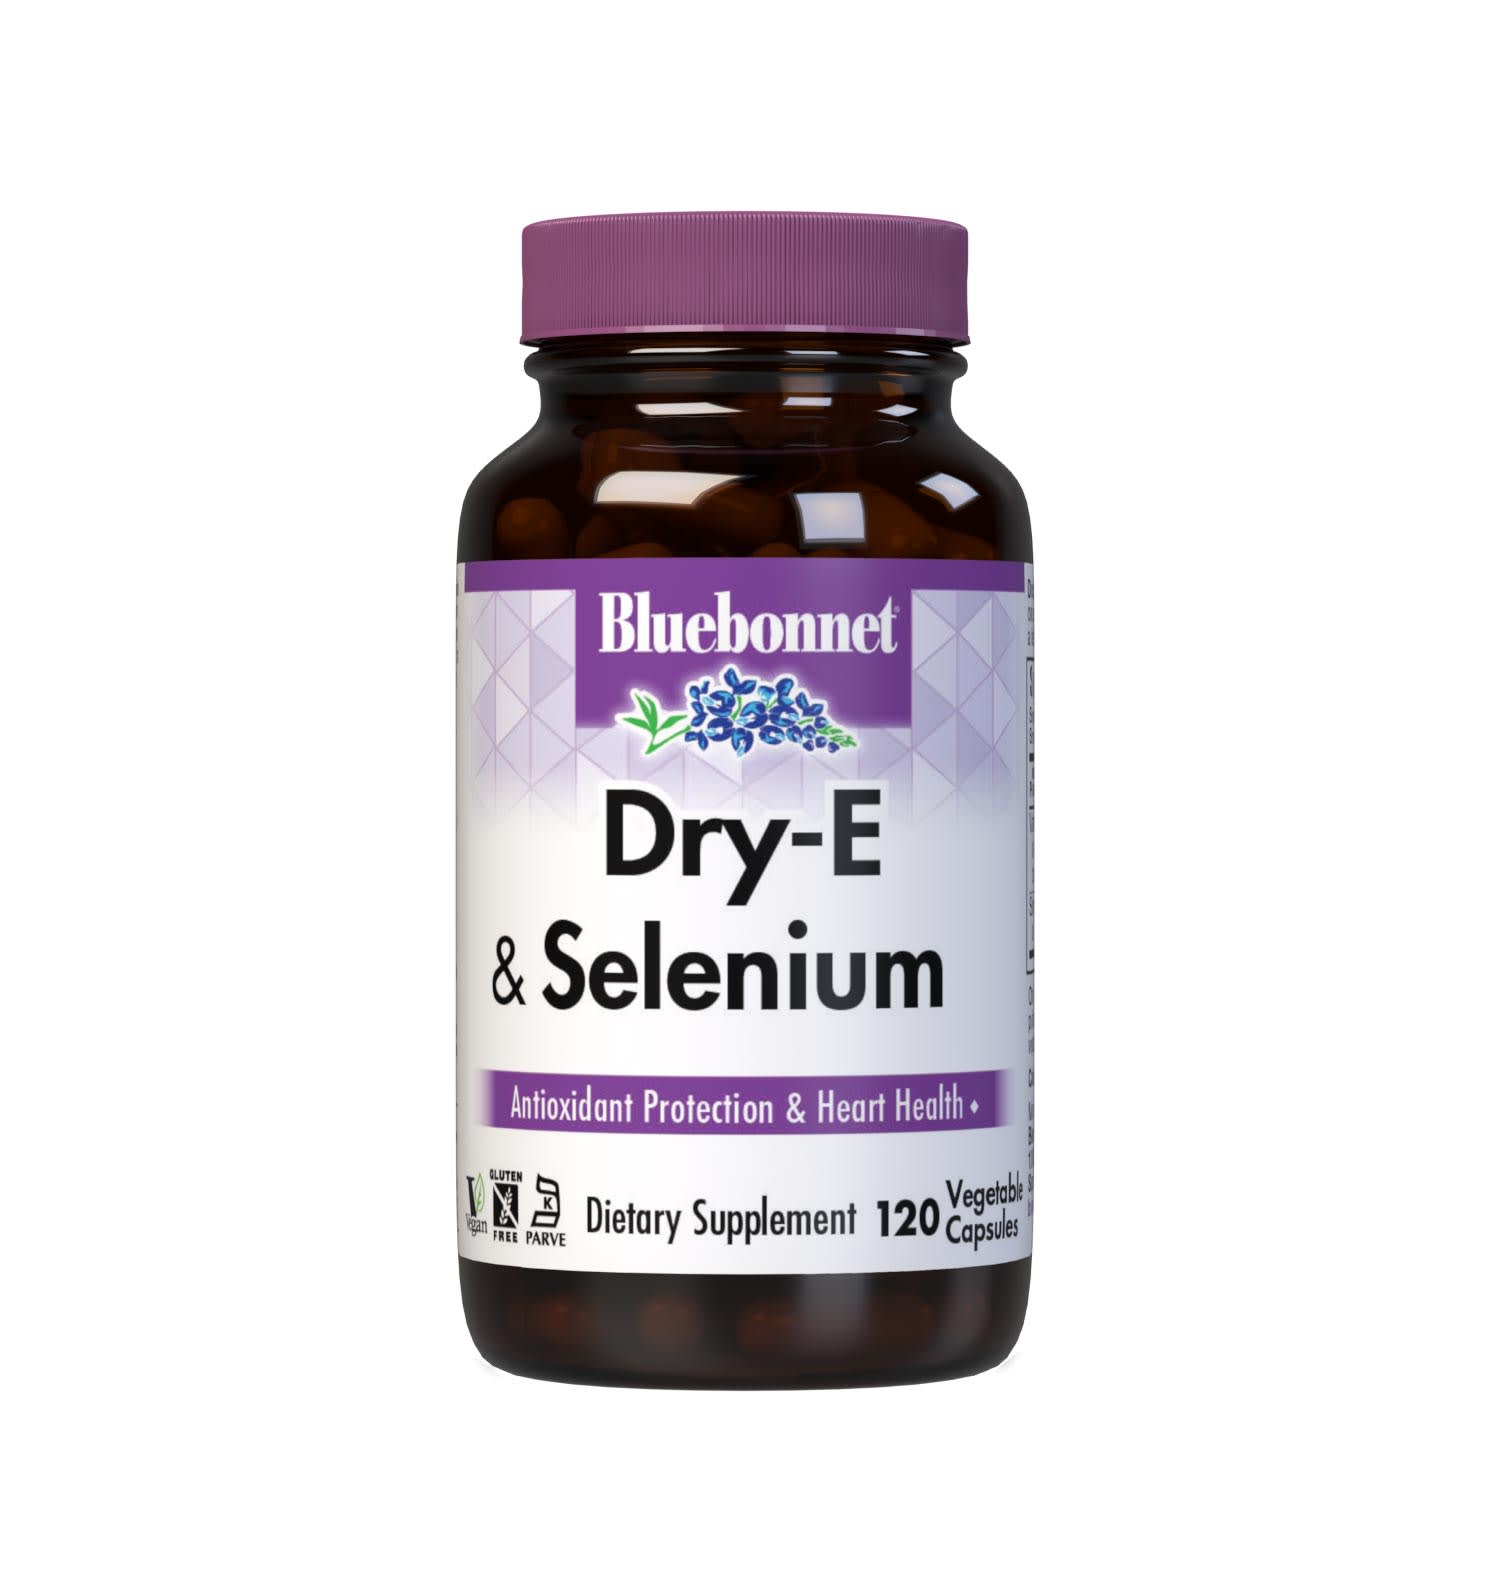 Dry E-268 mg (400 IU) & Selenium 120 Vegetable Capsules are formulated with vitamin E from oil-free d-alpha tocopheryl succinate, and selenium from L-selenomethionine. Vitamin E and selenium both offer free radical protection and cardiovascular support. #size_120 count